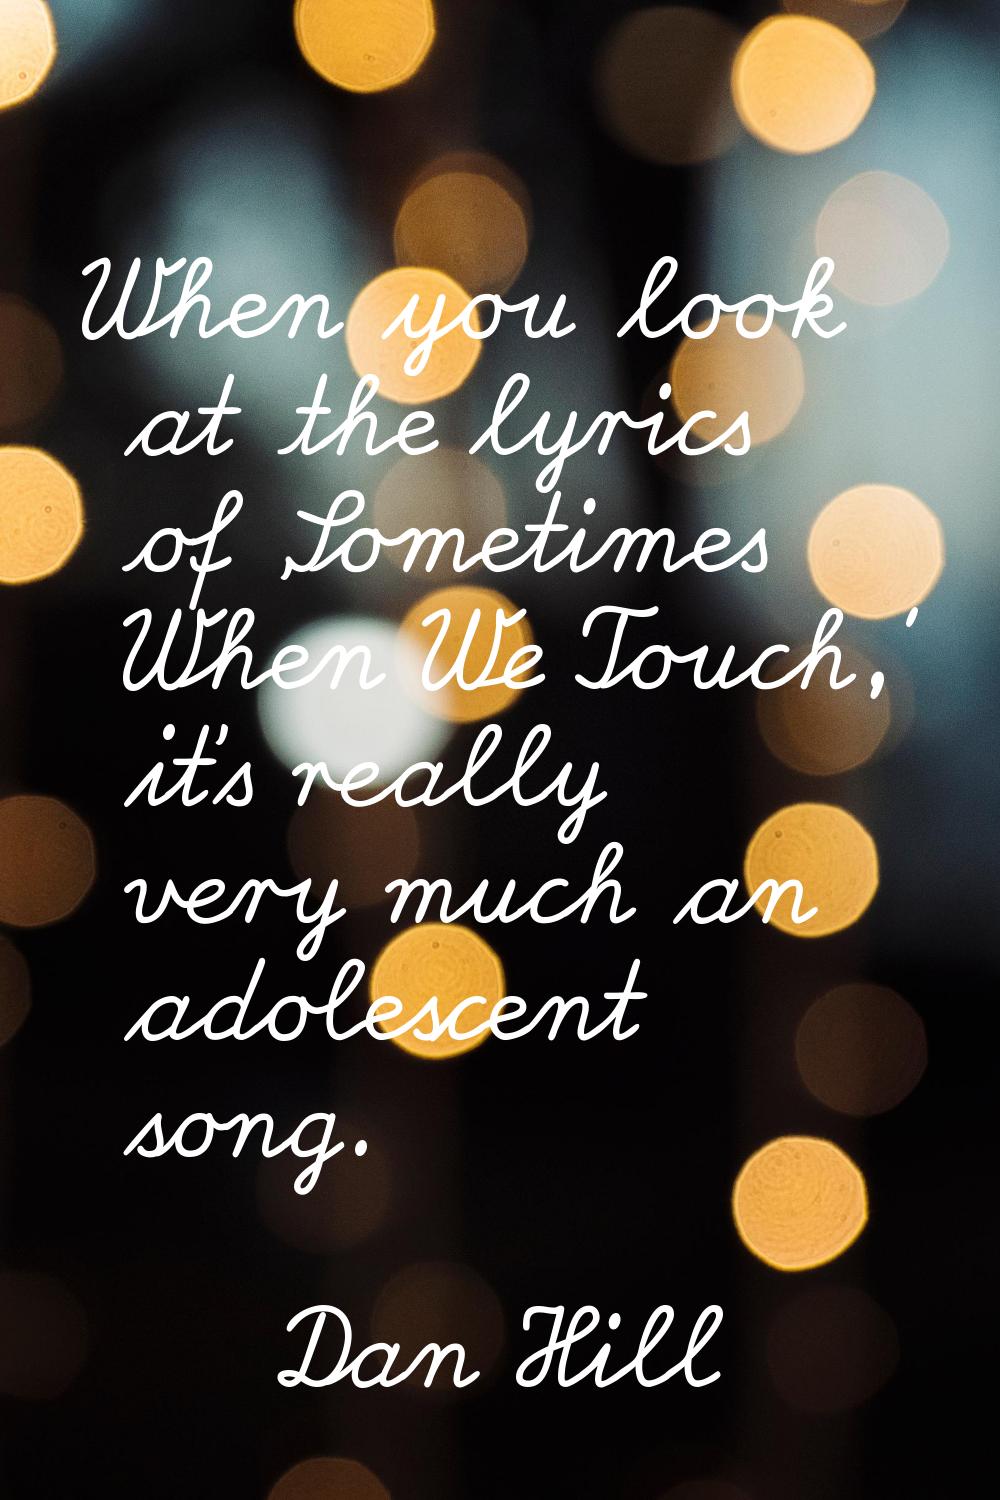 When you look at the lyrics of 'Sometimes When We Touch,' it's really very much an adolescent song.